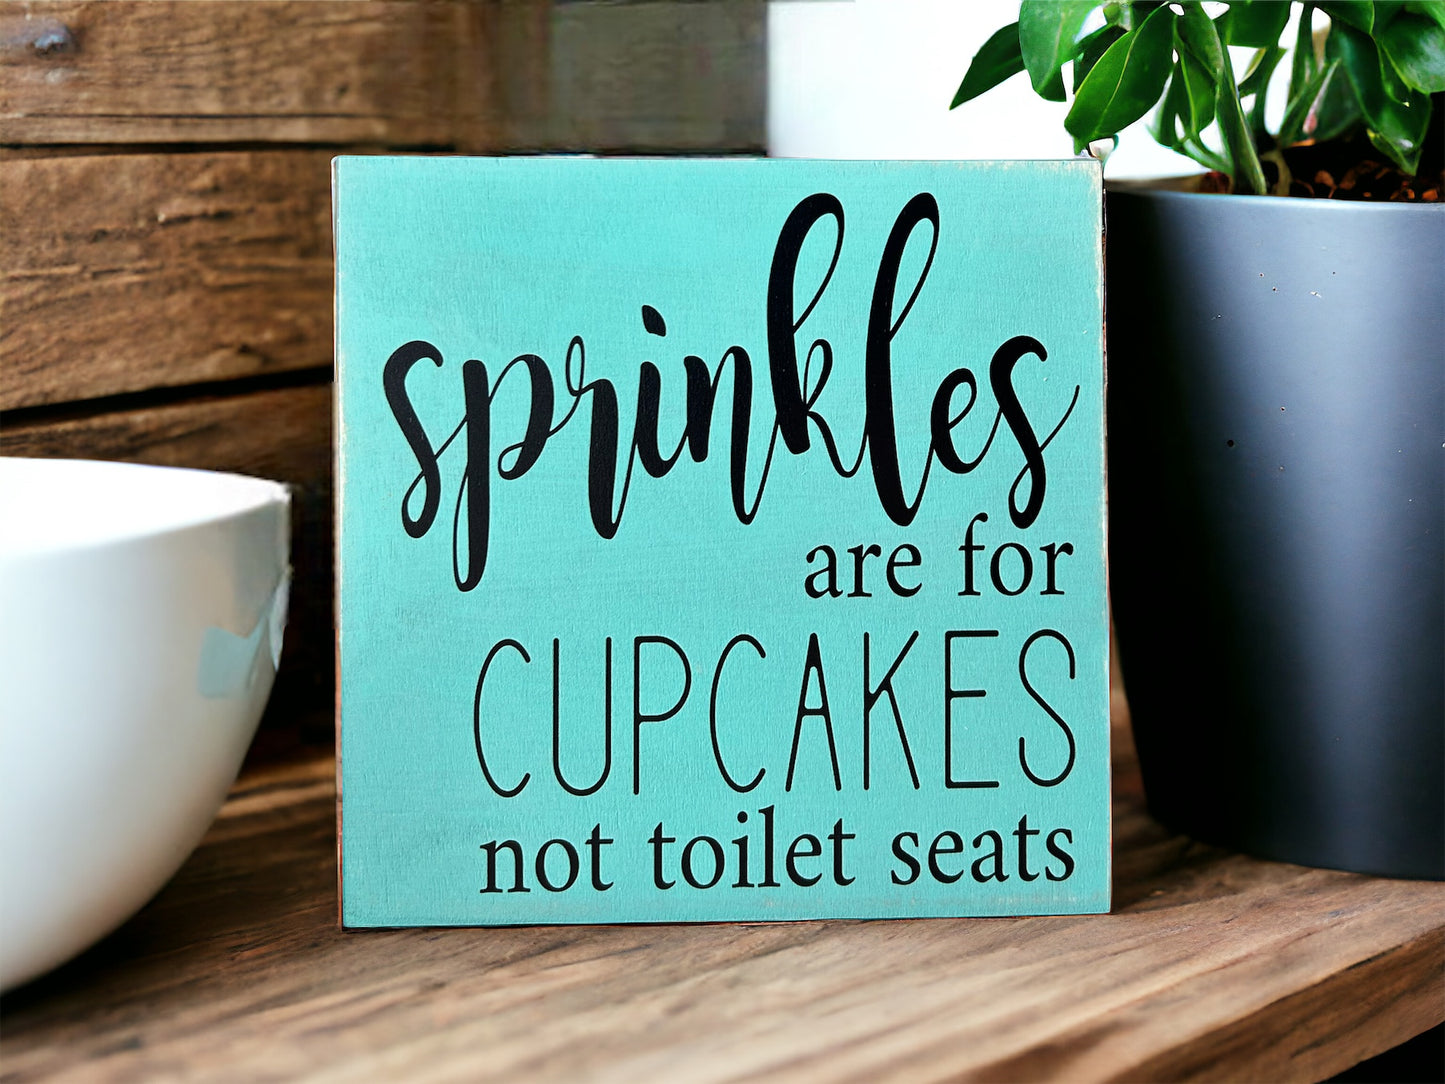 Sprinkles are for Cupcakes - Rustic Wood Shelf Sitter